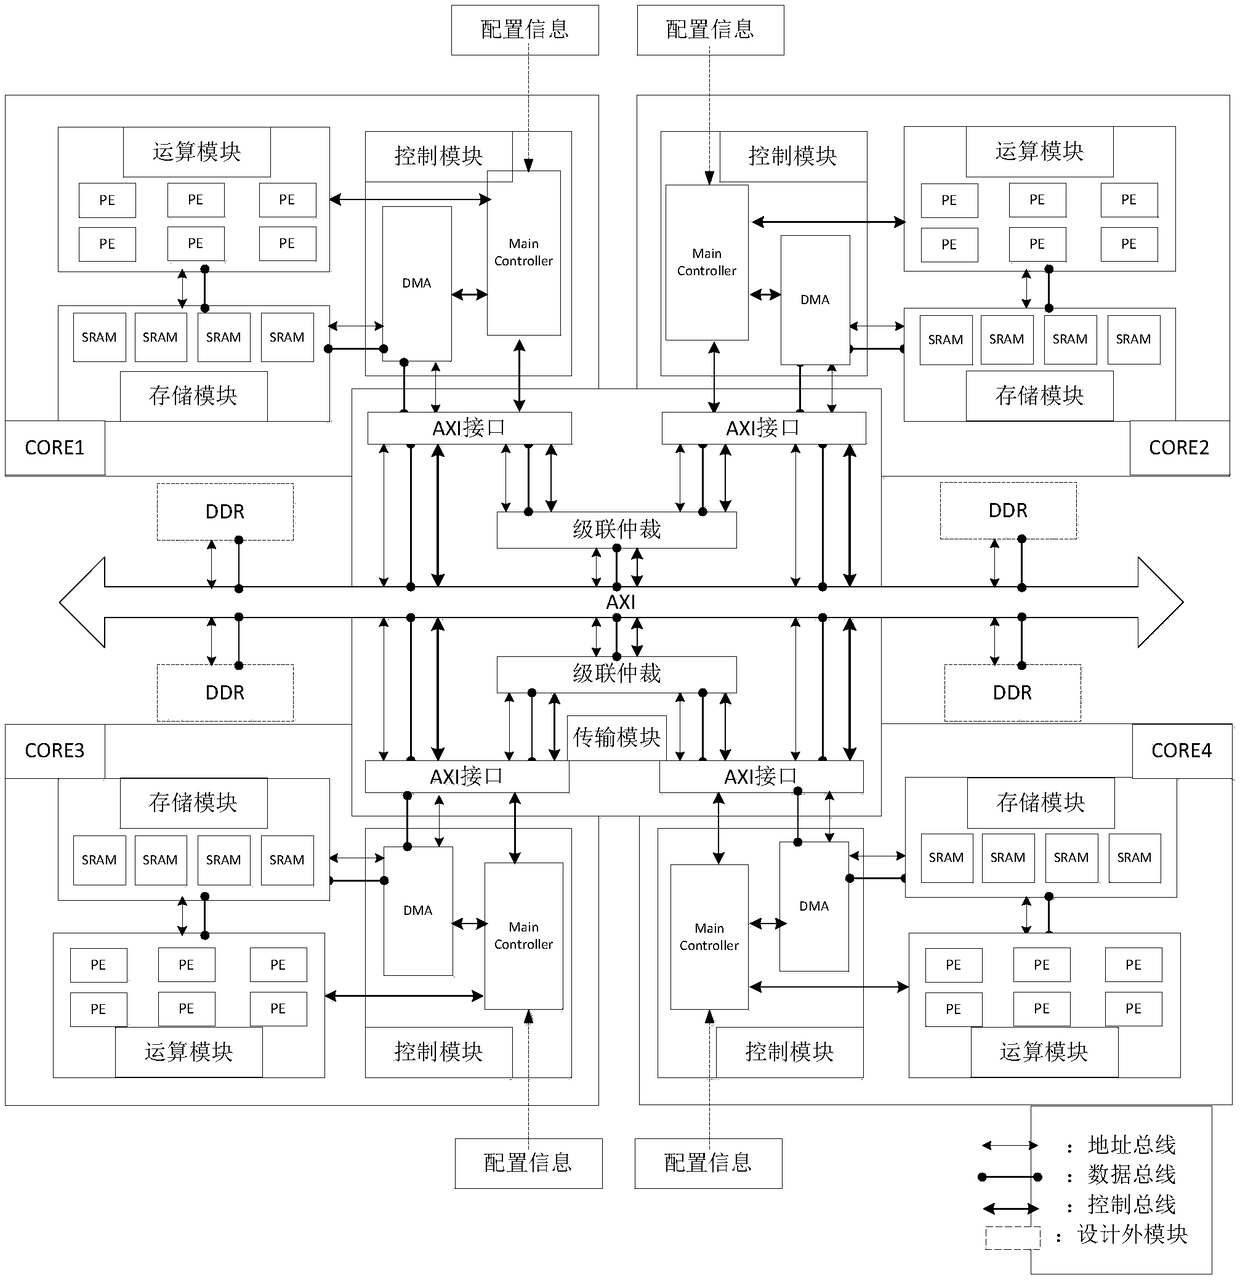 Multi-core cascade-based cycle accurate model of vector calculation hardware accelerator